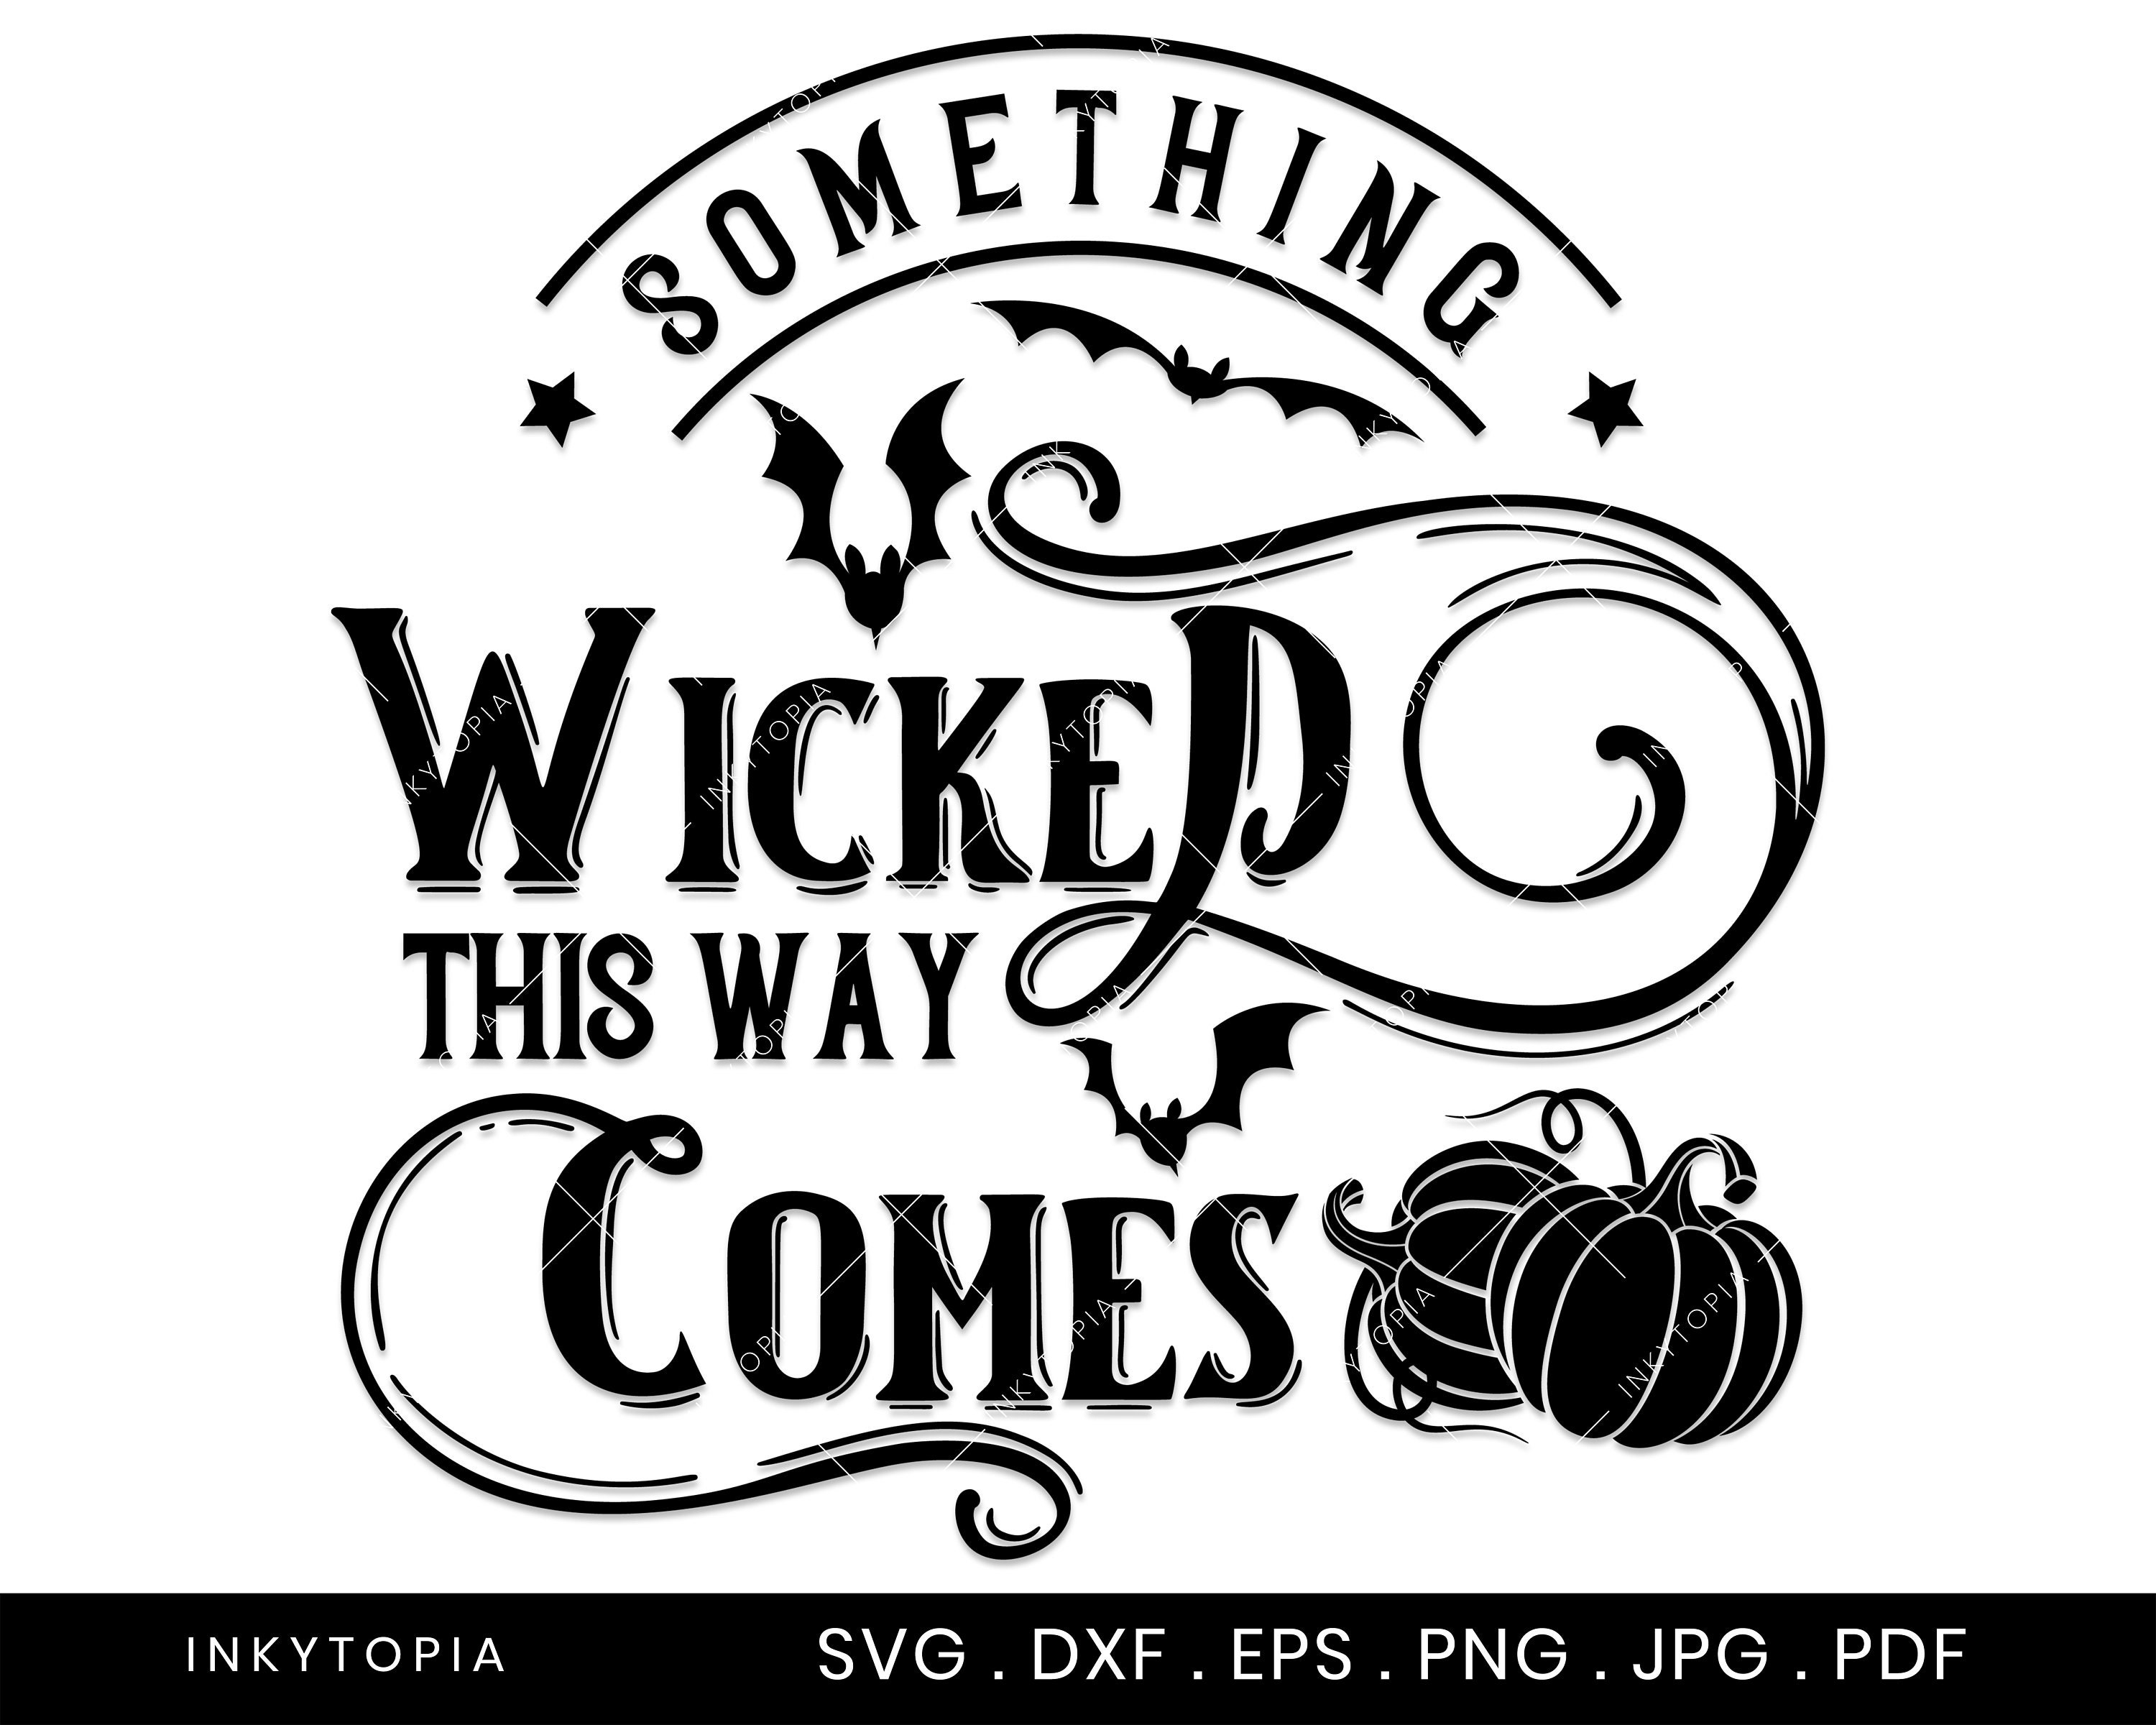 Halloween Digital Cut File Something Wicked This Way Comes png & eps svg dxf